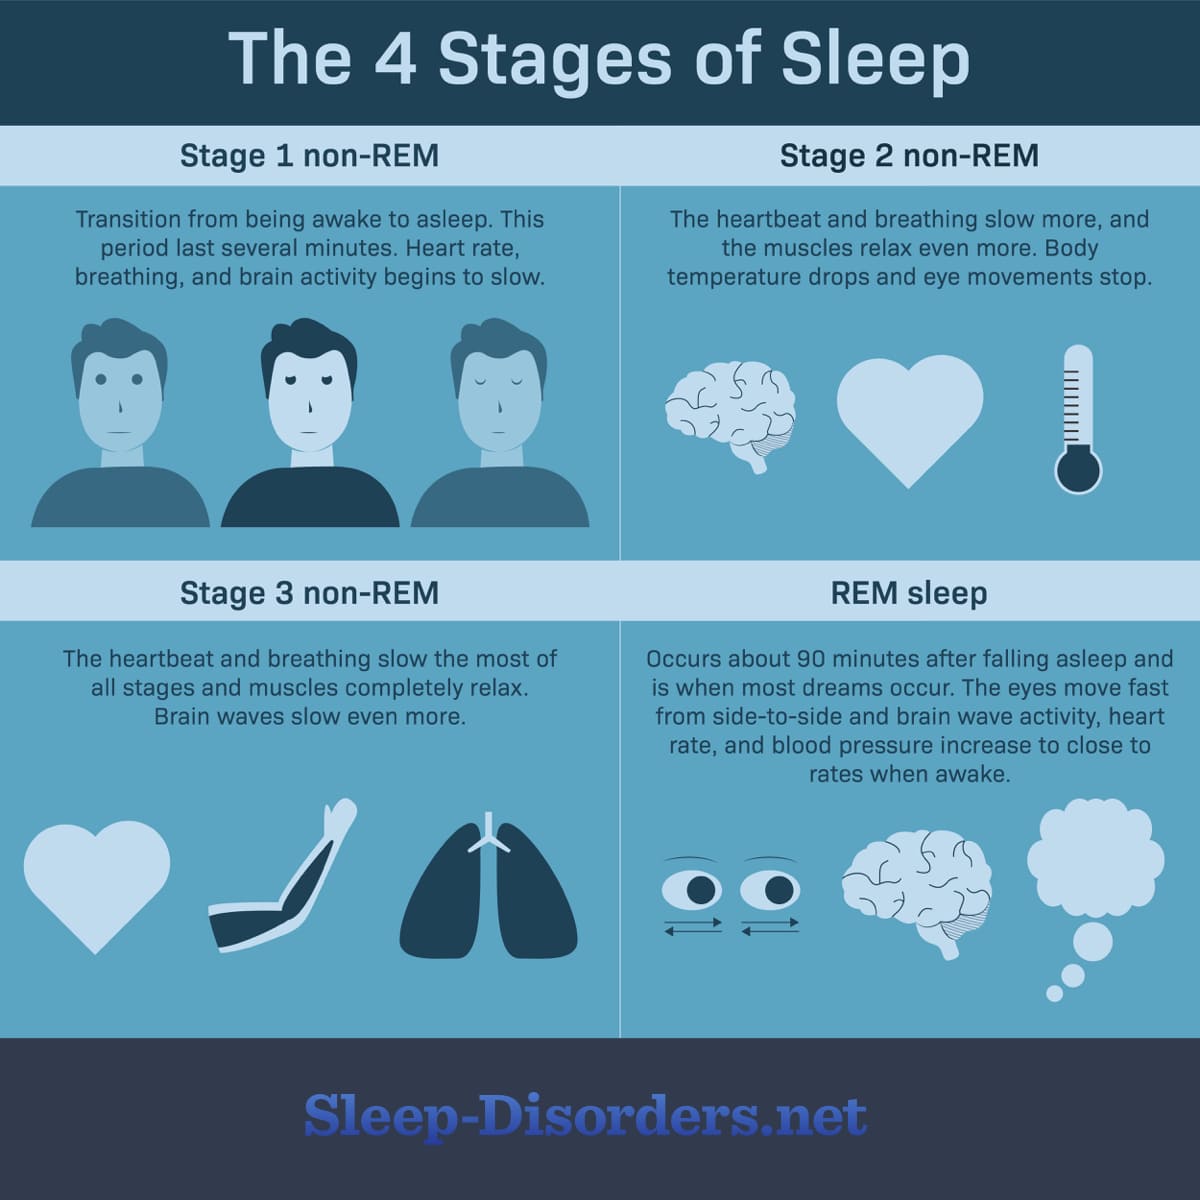 Four stages of sleep: stage 1 non-REM, stage 2 non-REM, stage 3 non-REM, stage 4 REM